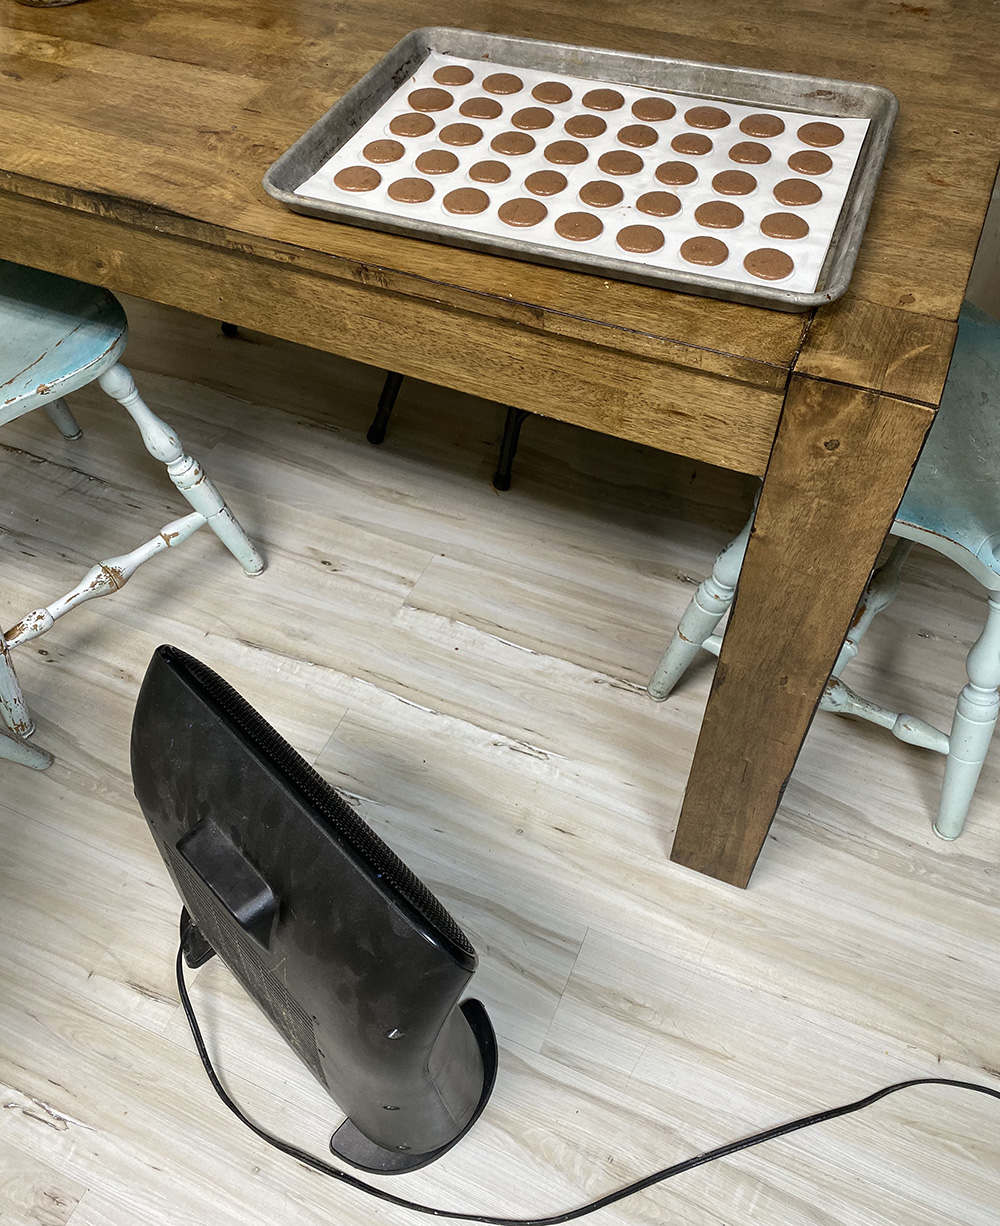 drying macarons on a humid day with a space heater